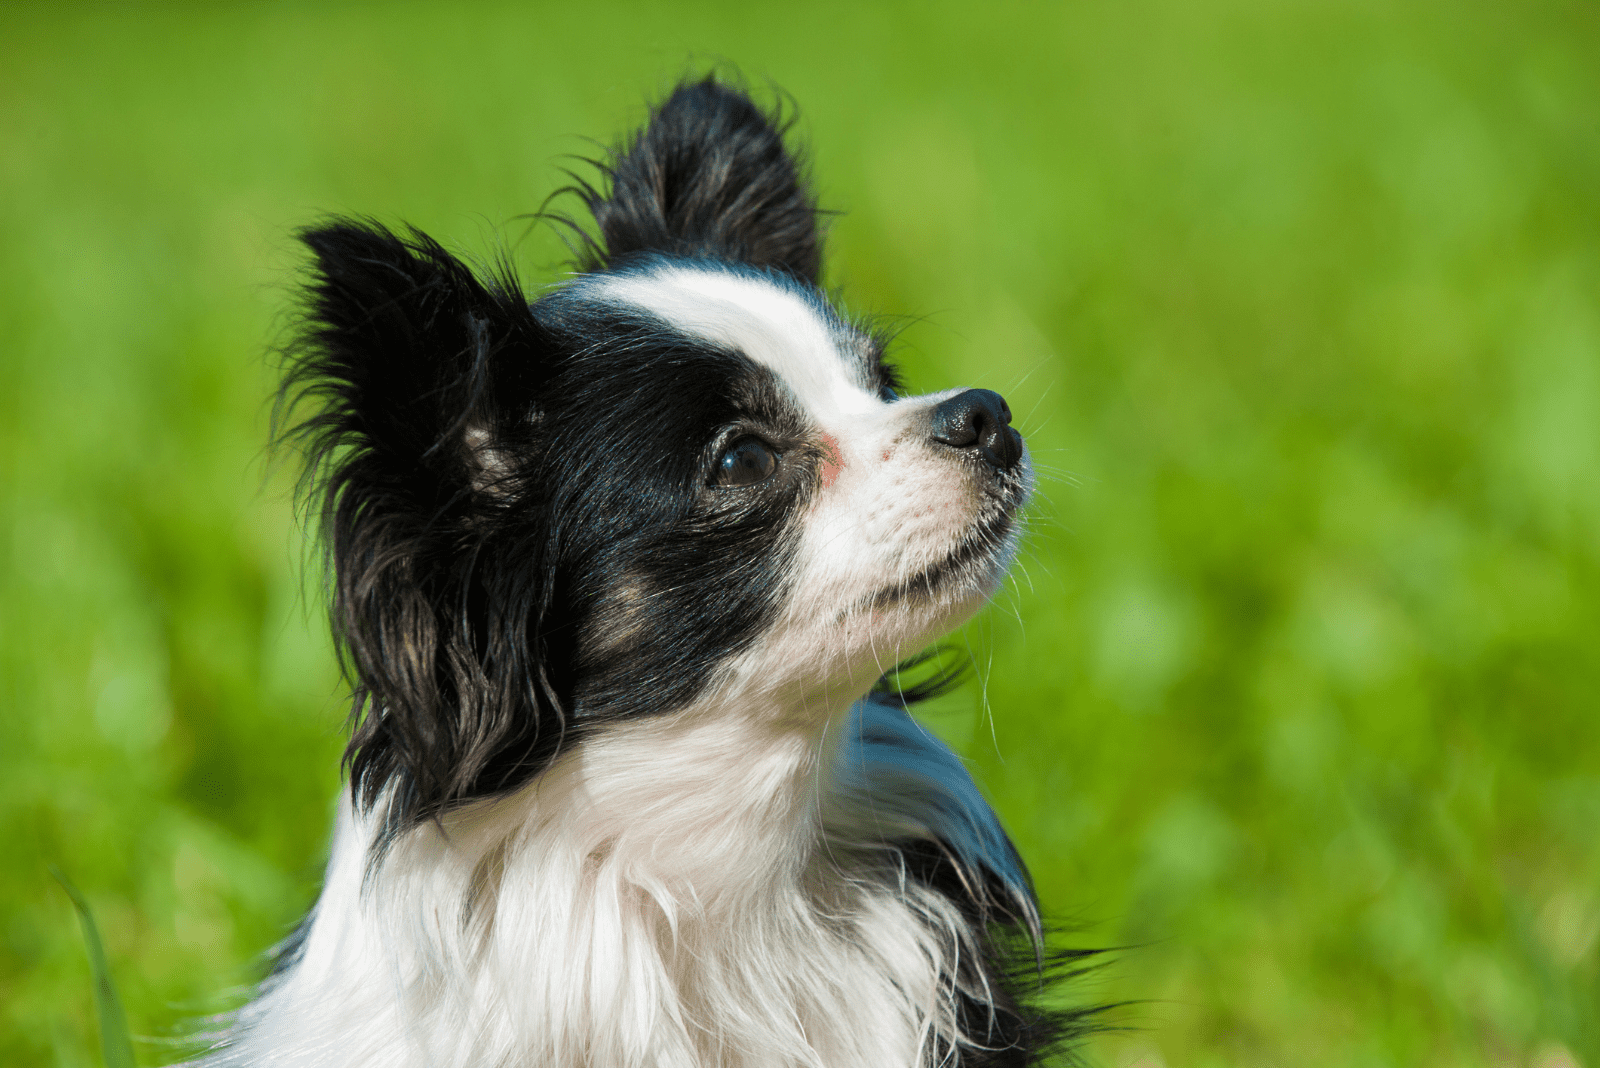 Black White Chihuahua is standing on green grass and looking up